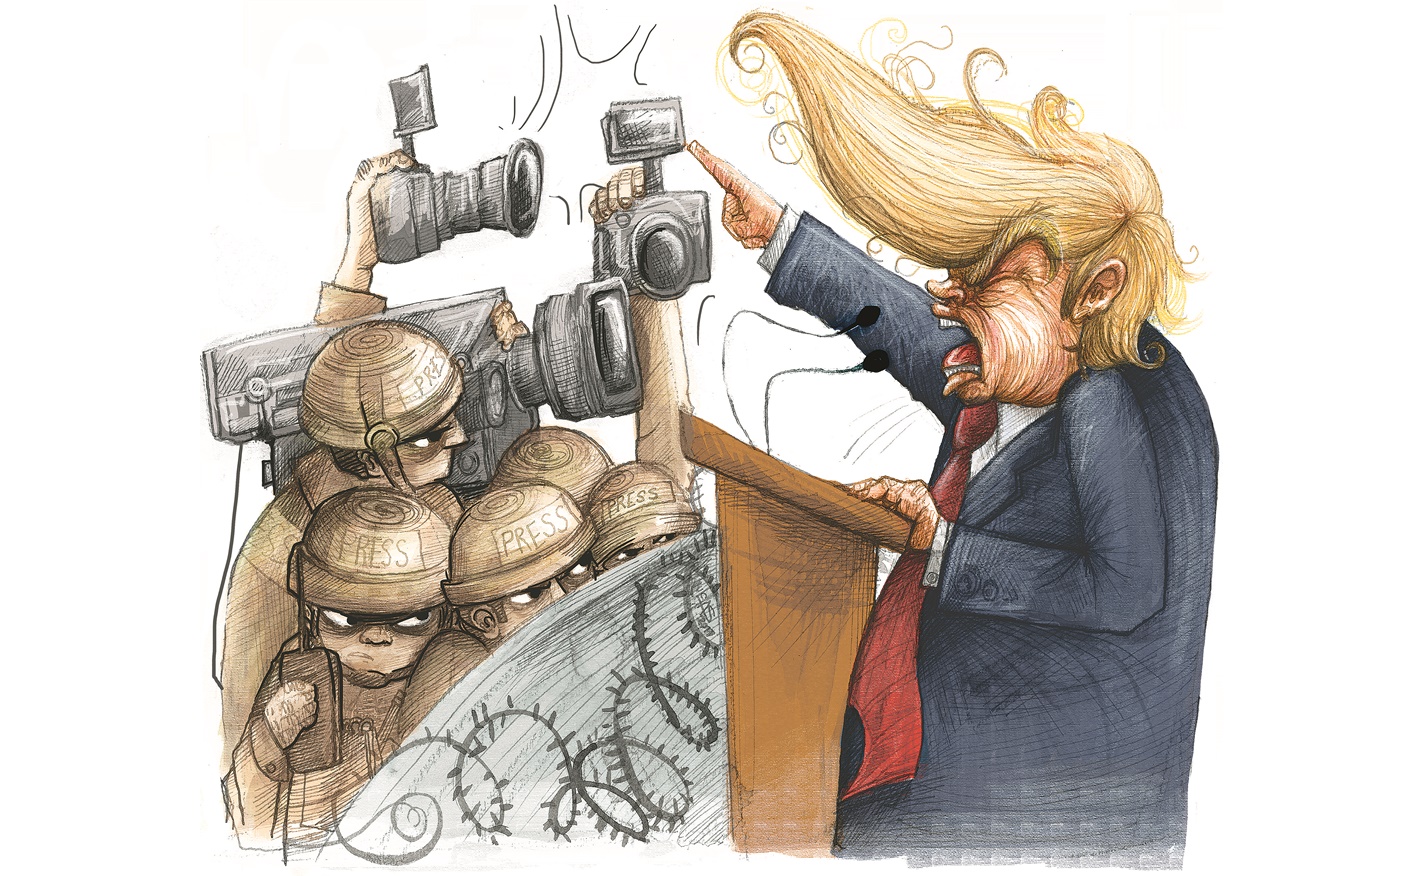 International Dossier. Trump and the Media at Cold War